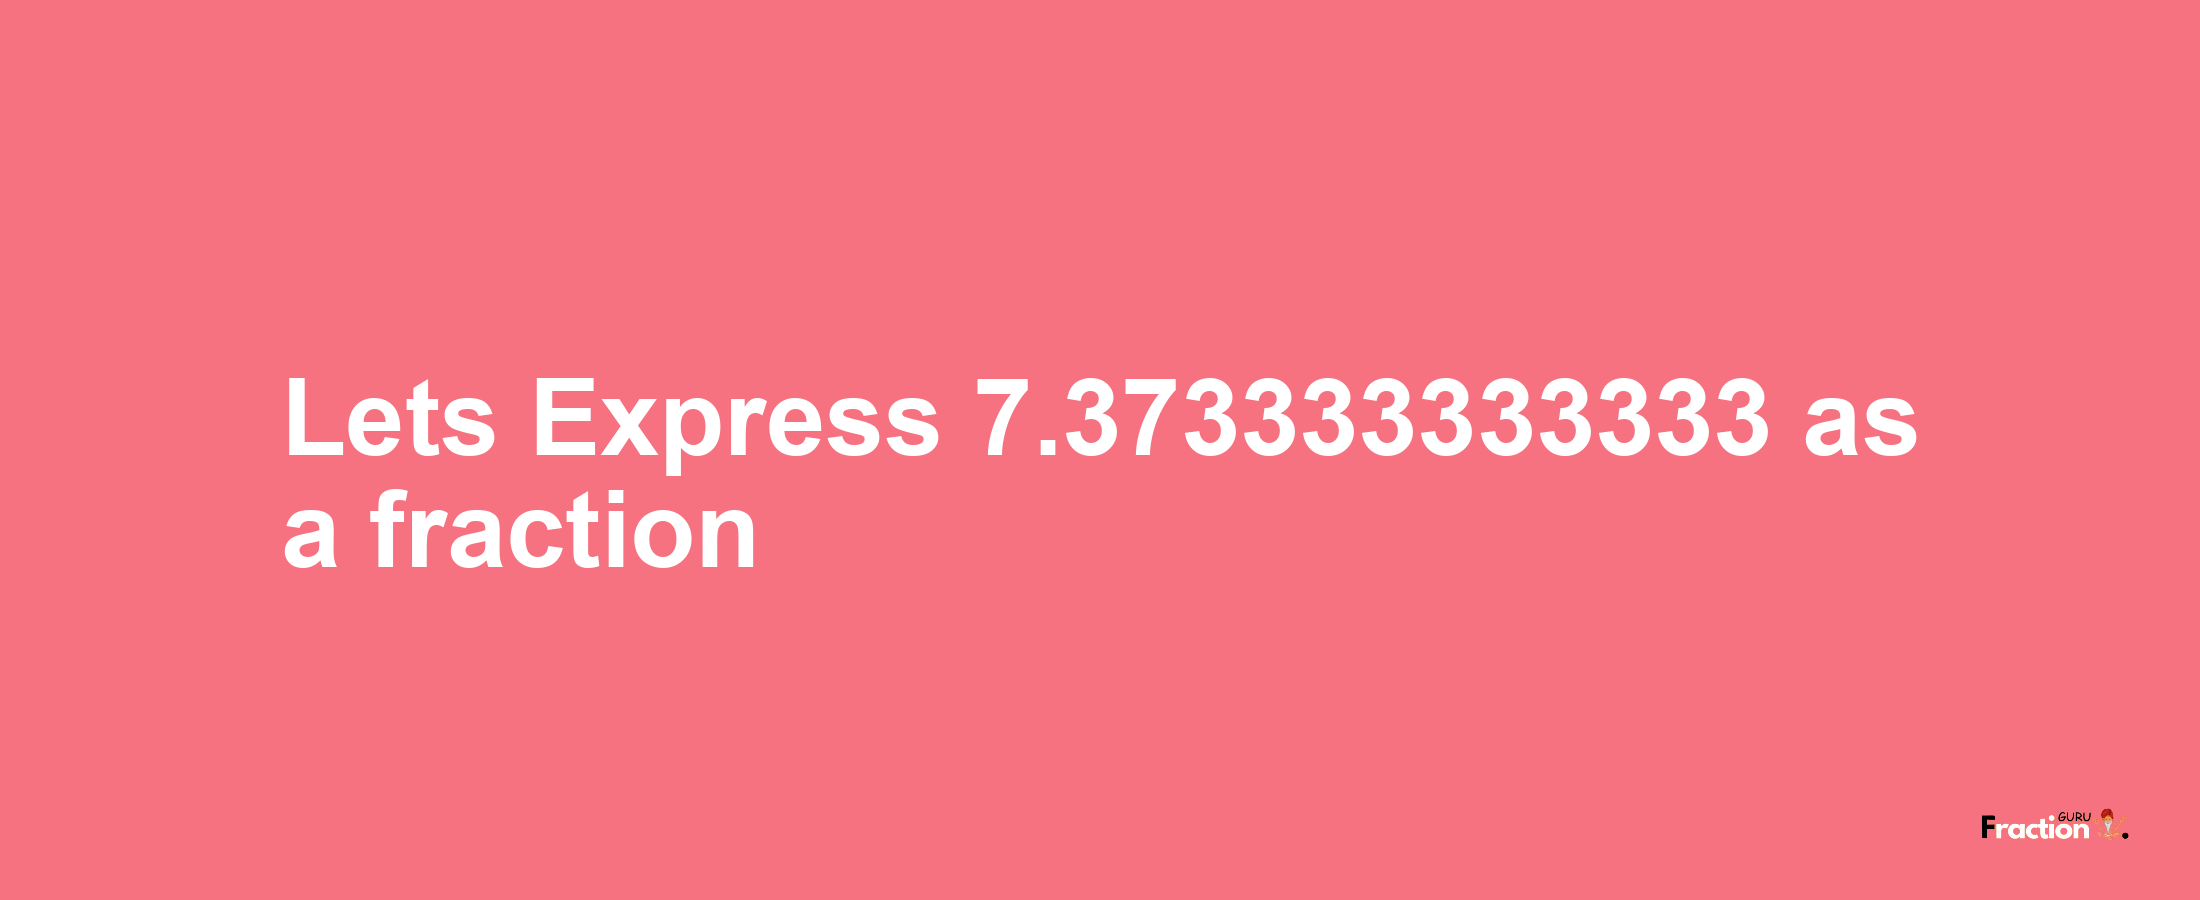 Lets Express 7.373333333333 as afraction